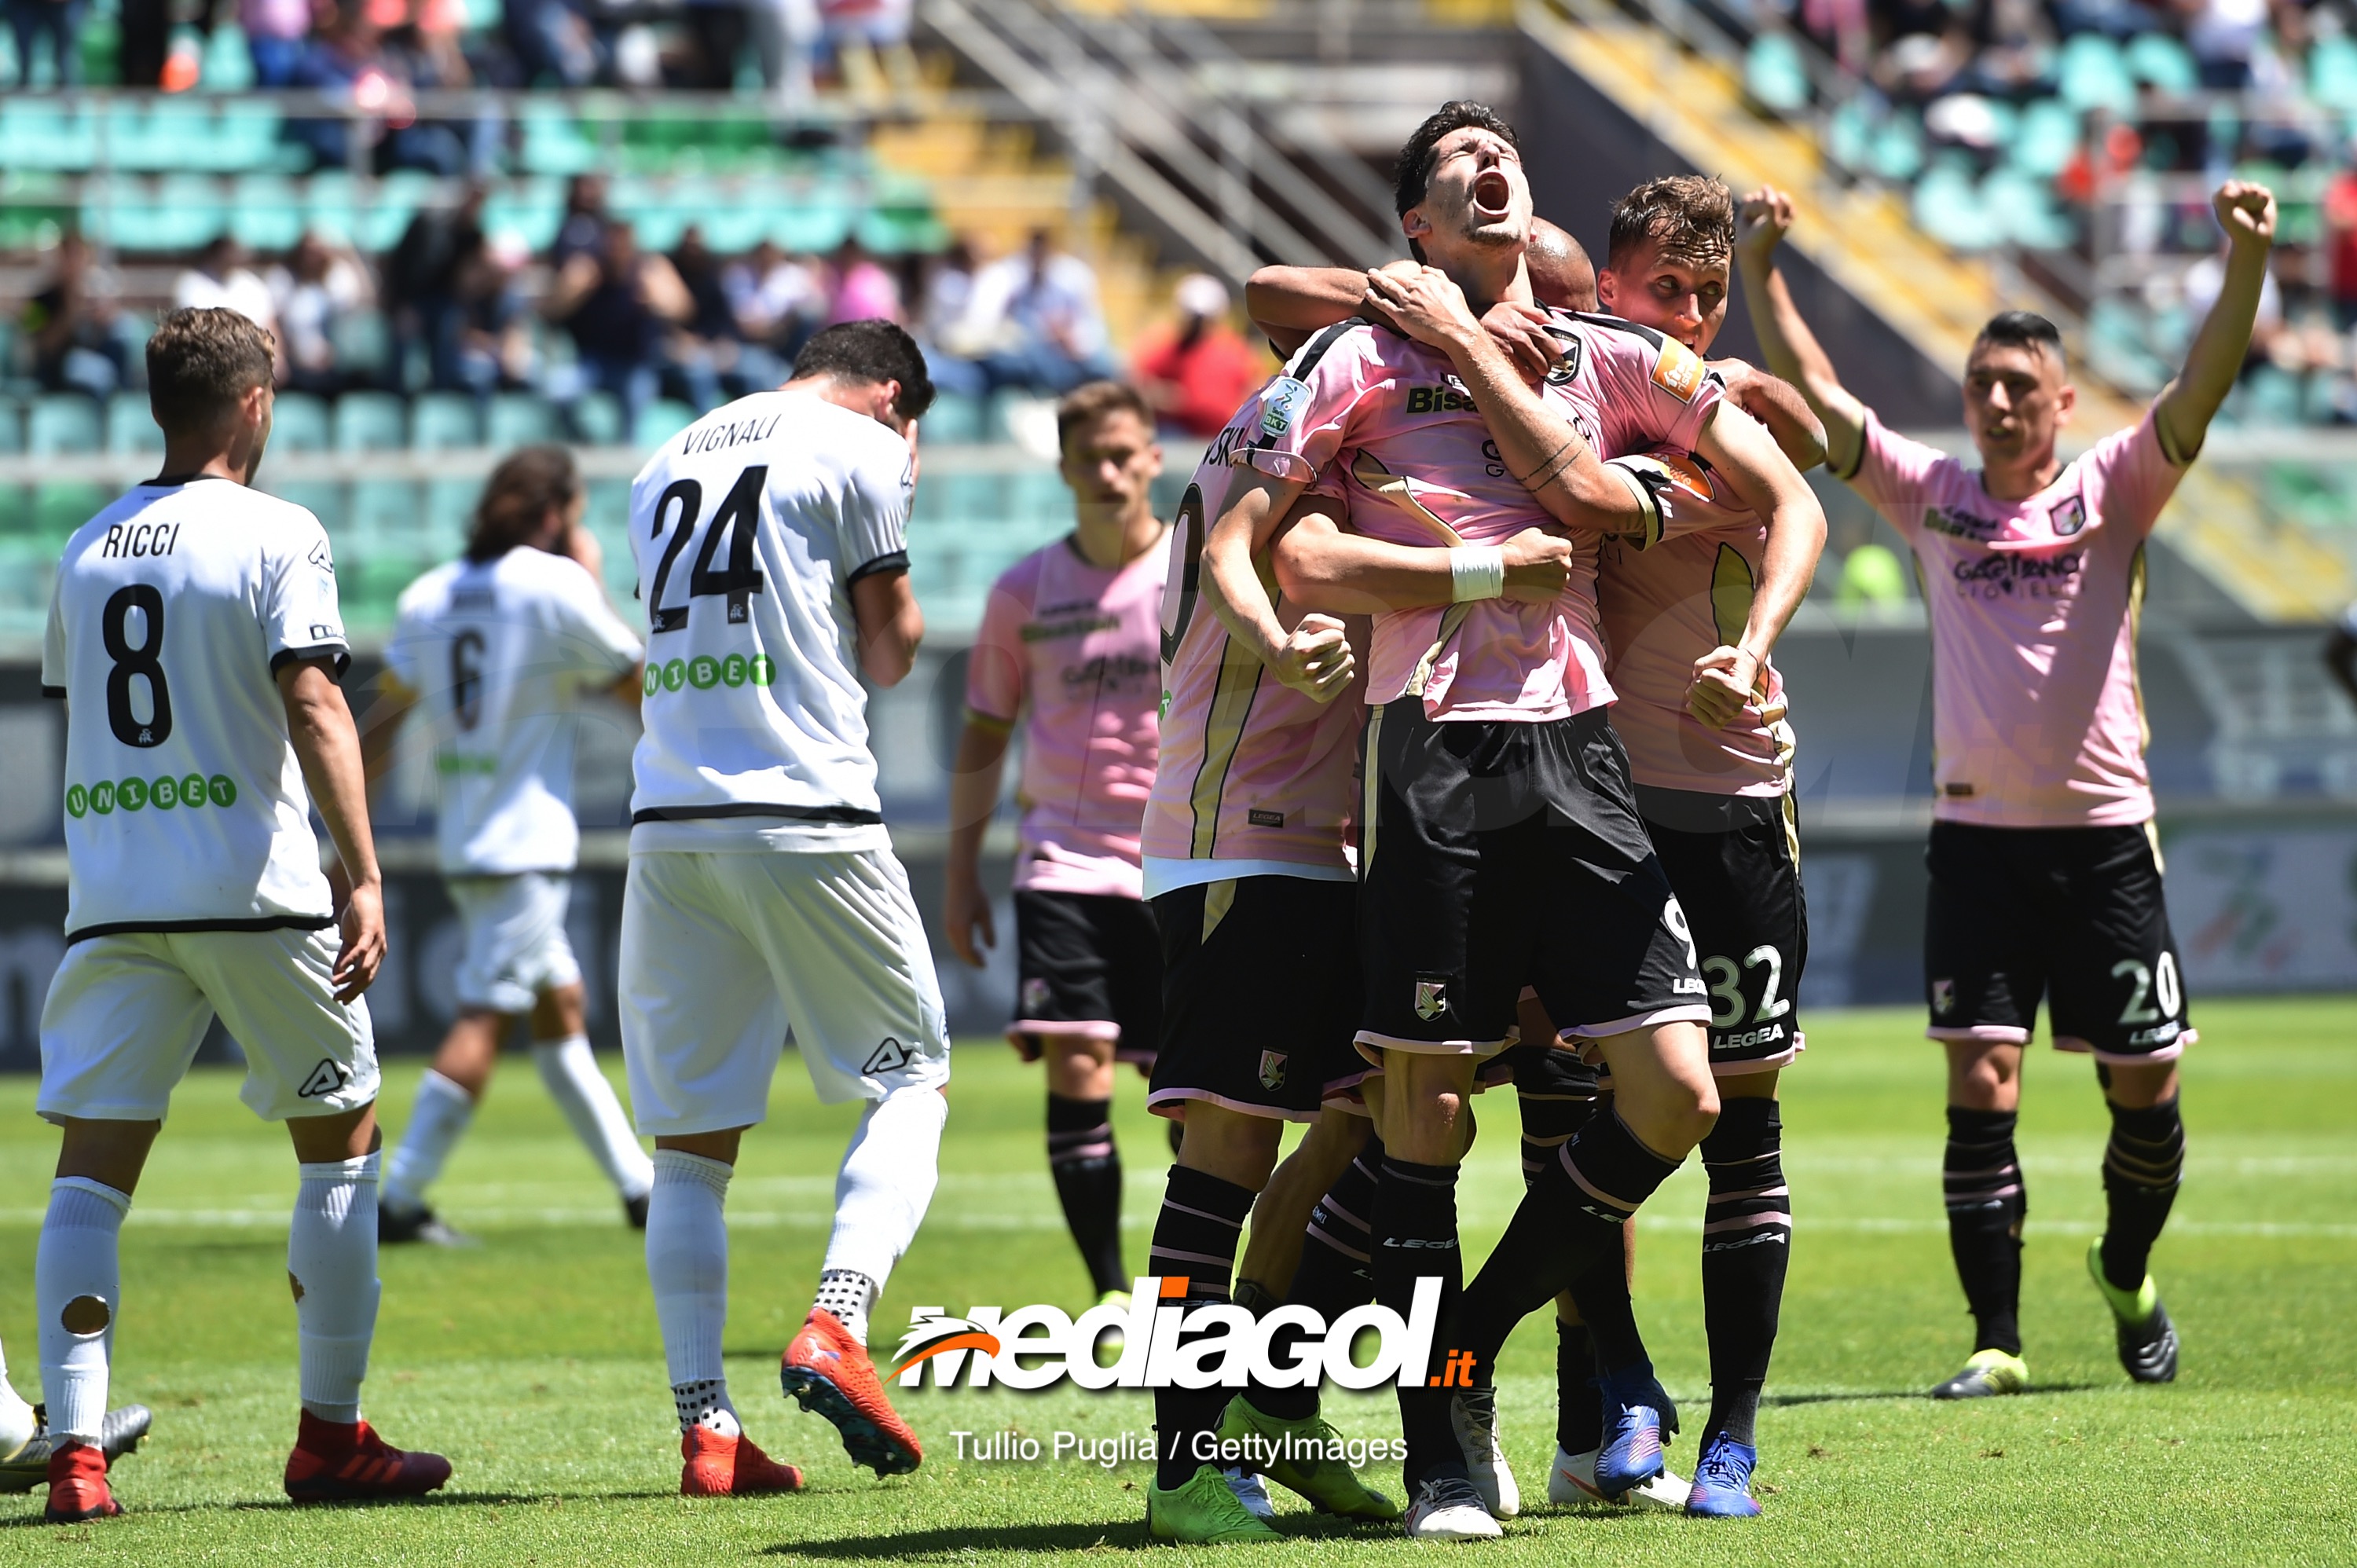 PALERMO, ITALY - MAY 01: Stefano Moreo of Palermo celebrates after scores his team's second goal during the Serie B match between US Citta di Palermo and AC Spezia at Stadio Renzo Barbera on May 01, 2019 in Palermo, Italy. (Photo by Tullio M. Puglia/Getty Images)